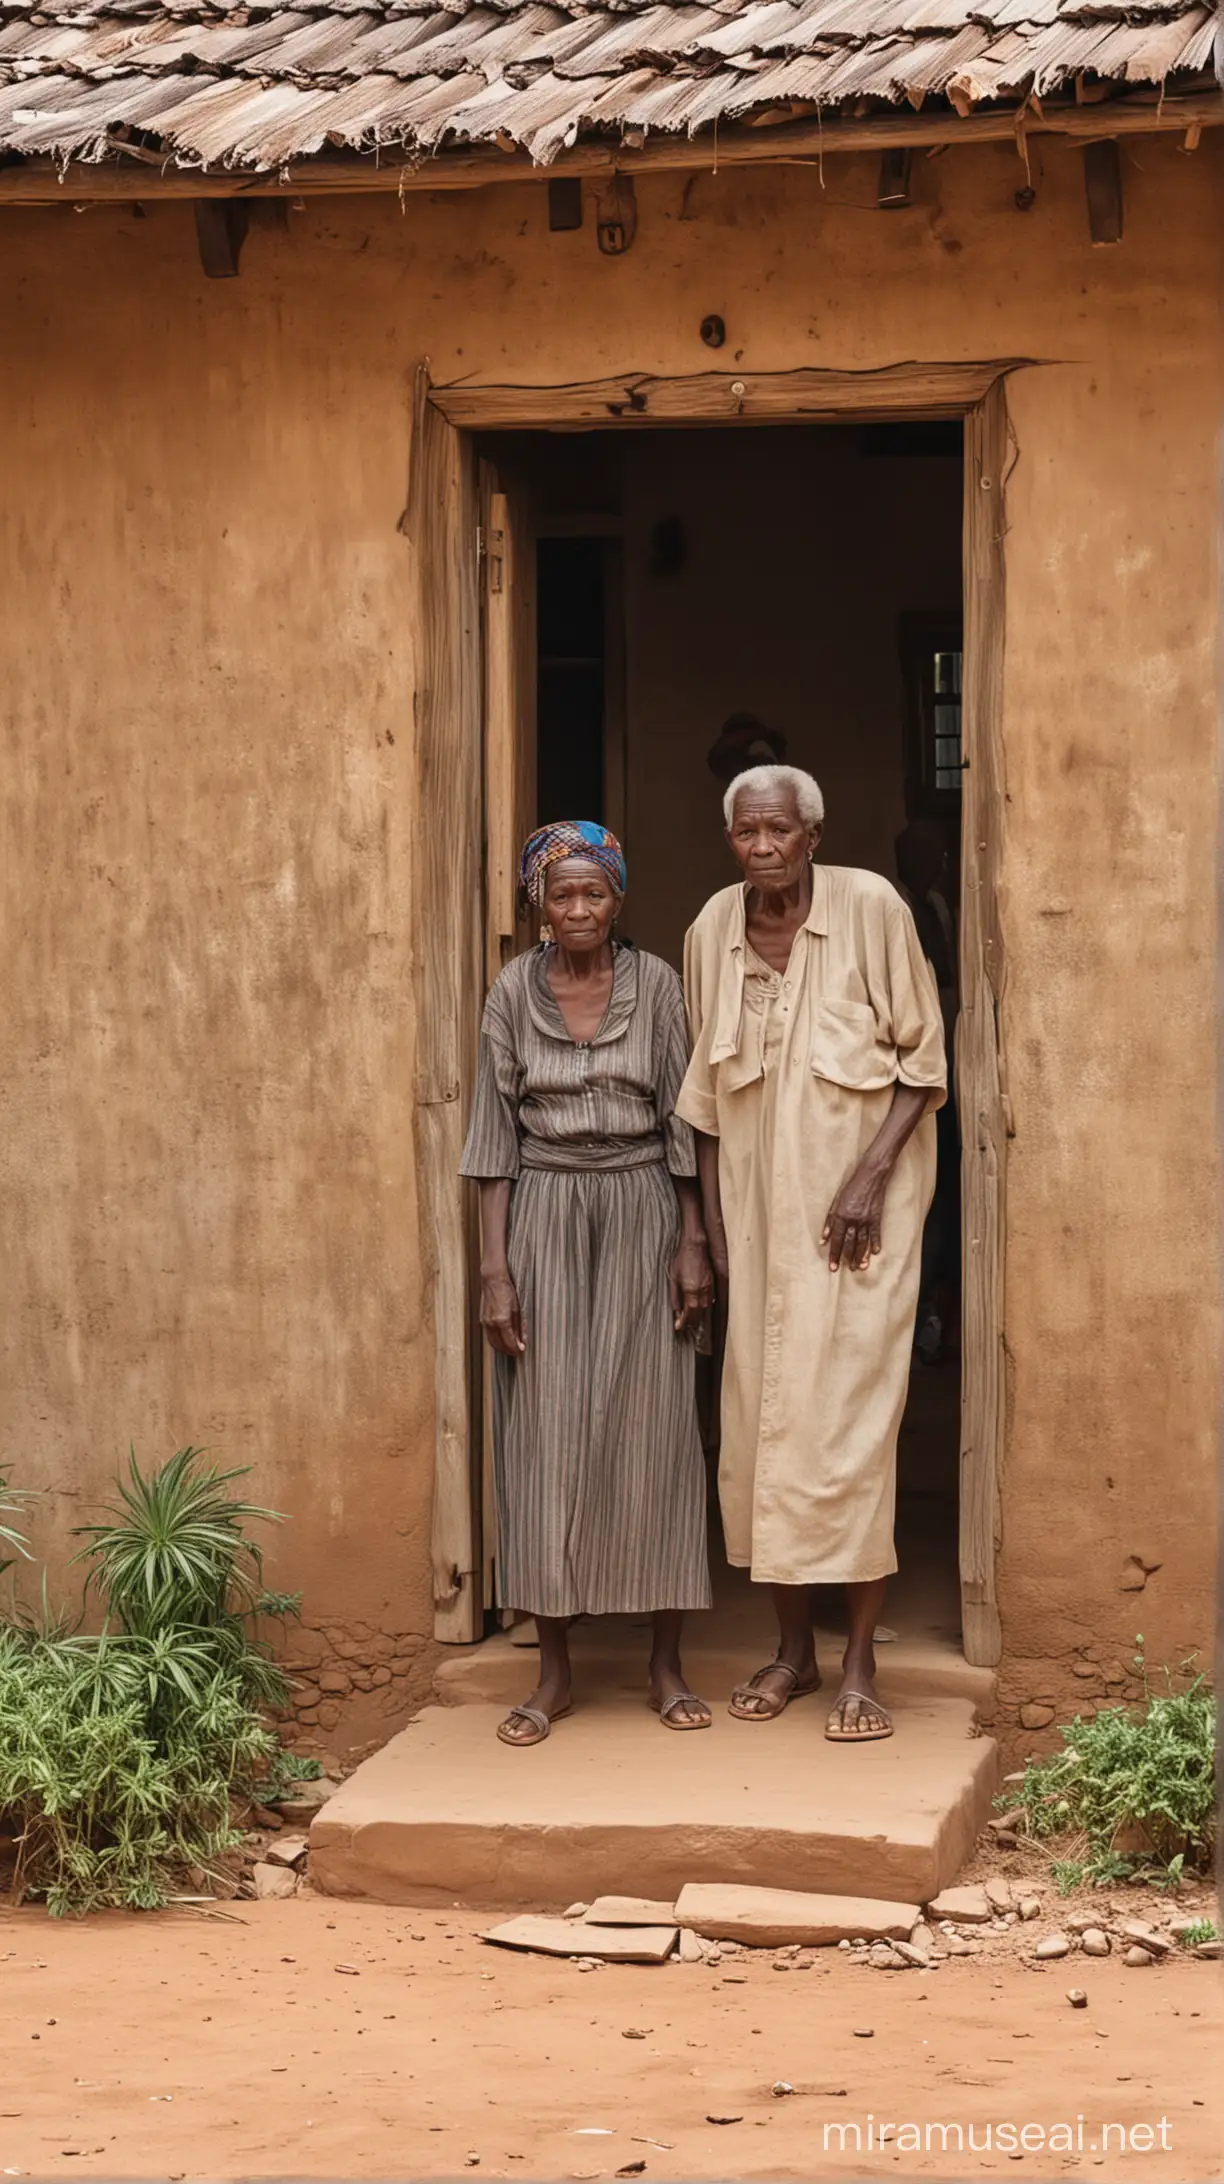 Old people in old village house in Africa 